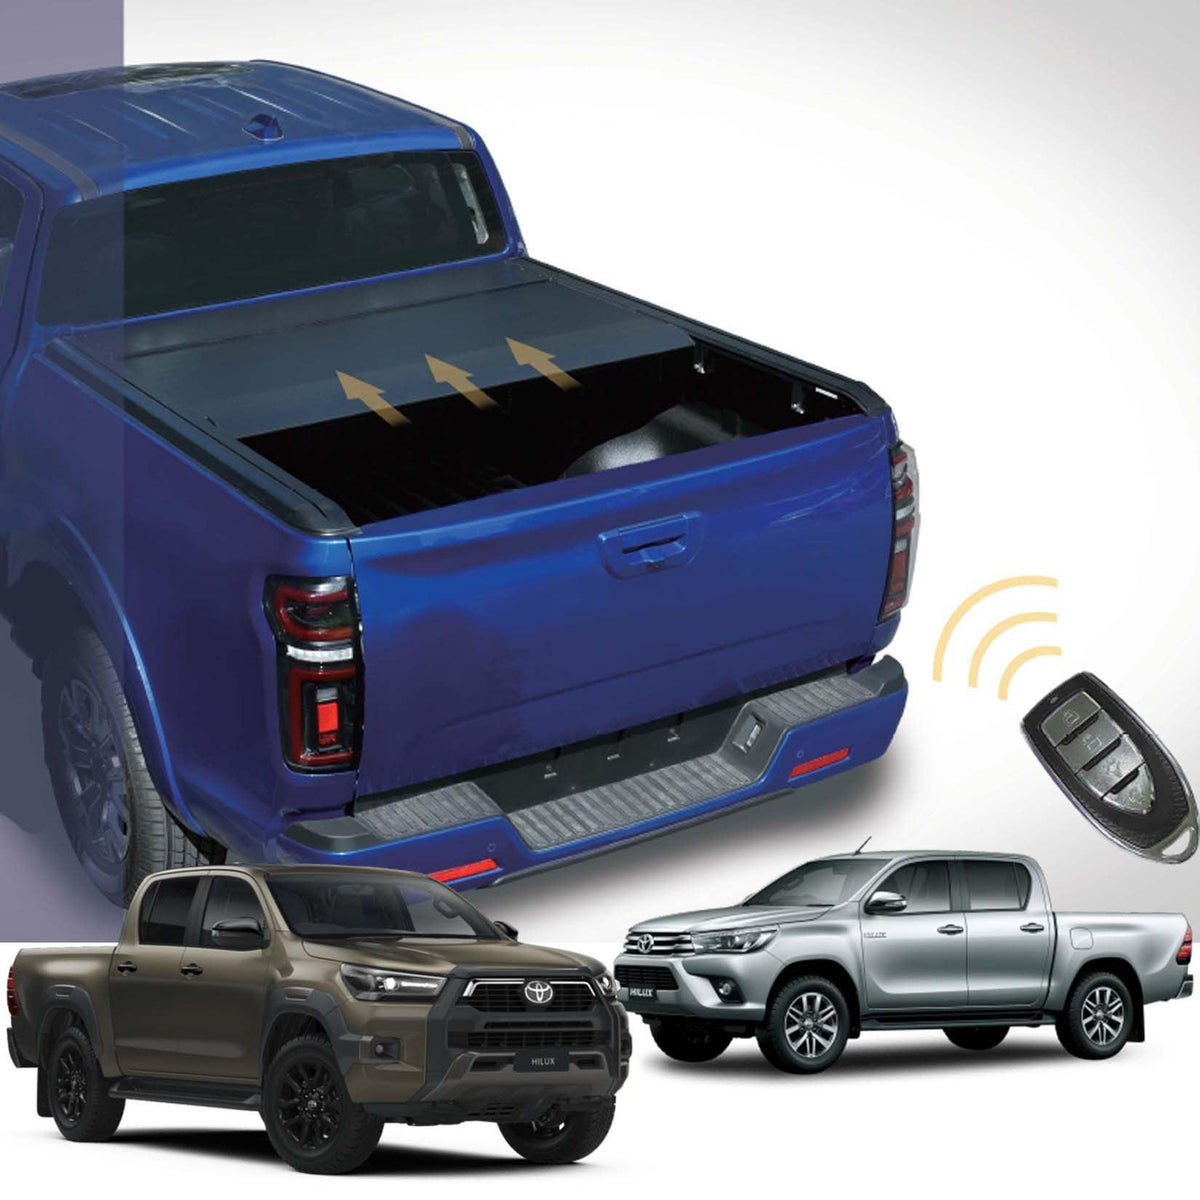 TOYOTA HILUX 2016 ON - DOUBLE CAB - RIDGEBACK AUTO ELECTRIC ROLL TOP COVER - Storm Xccessories2